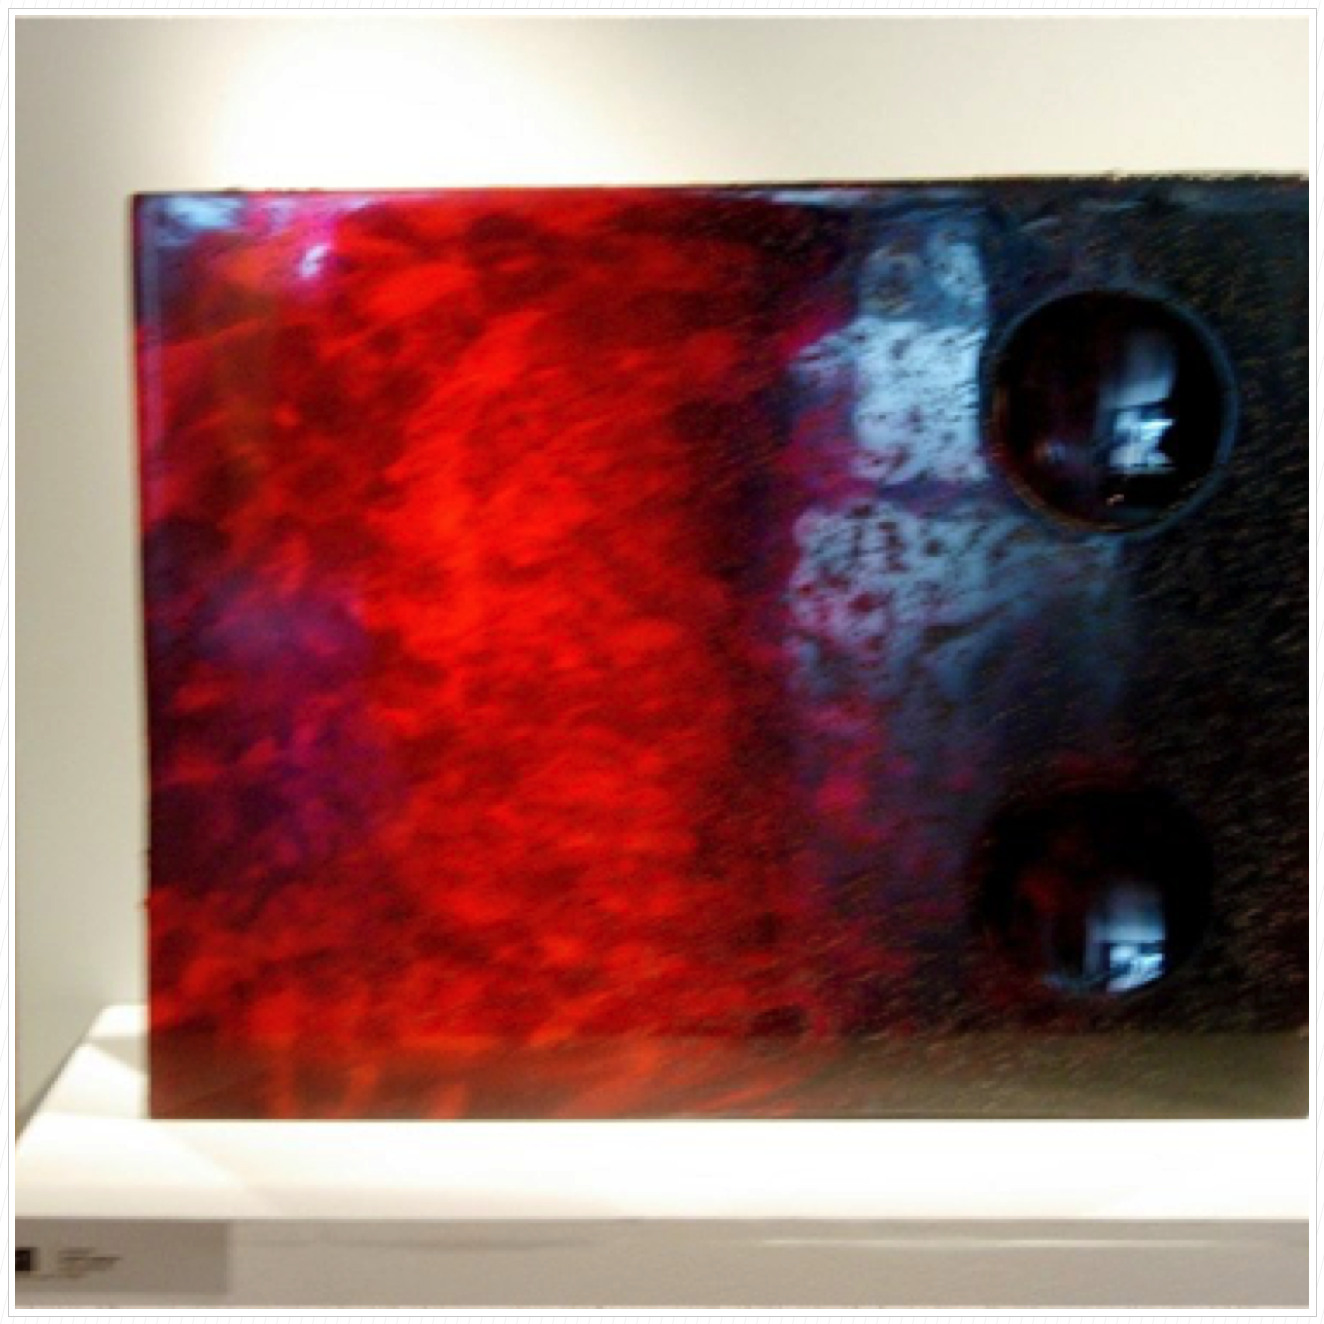 Red Event Horizon
2008
Lead Crystal
24 x 29 x 4
$11,500